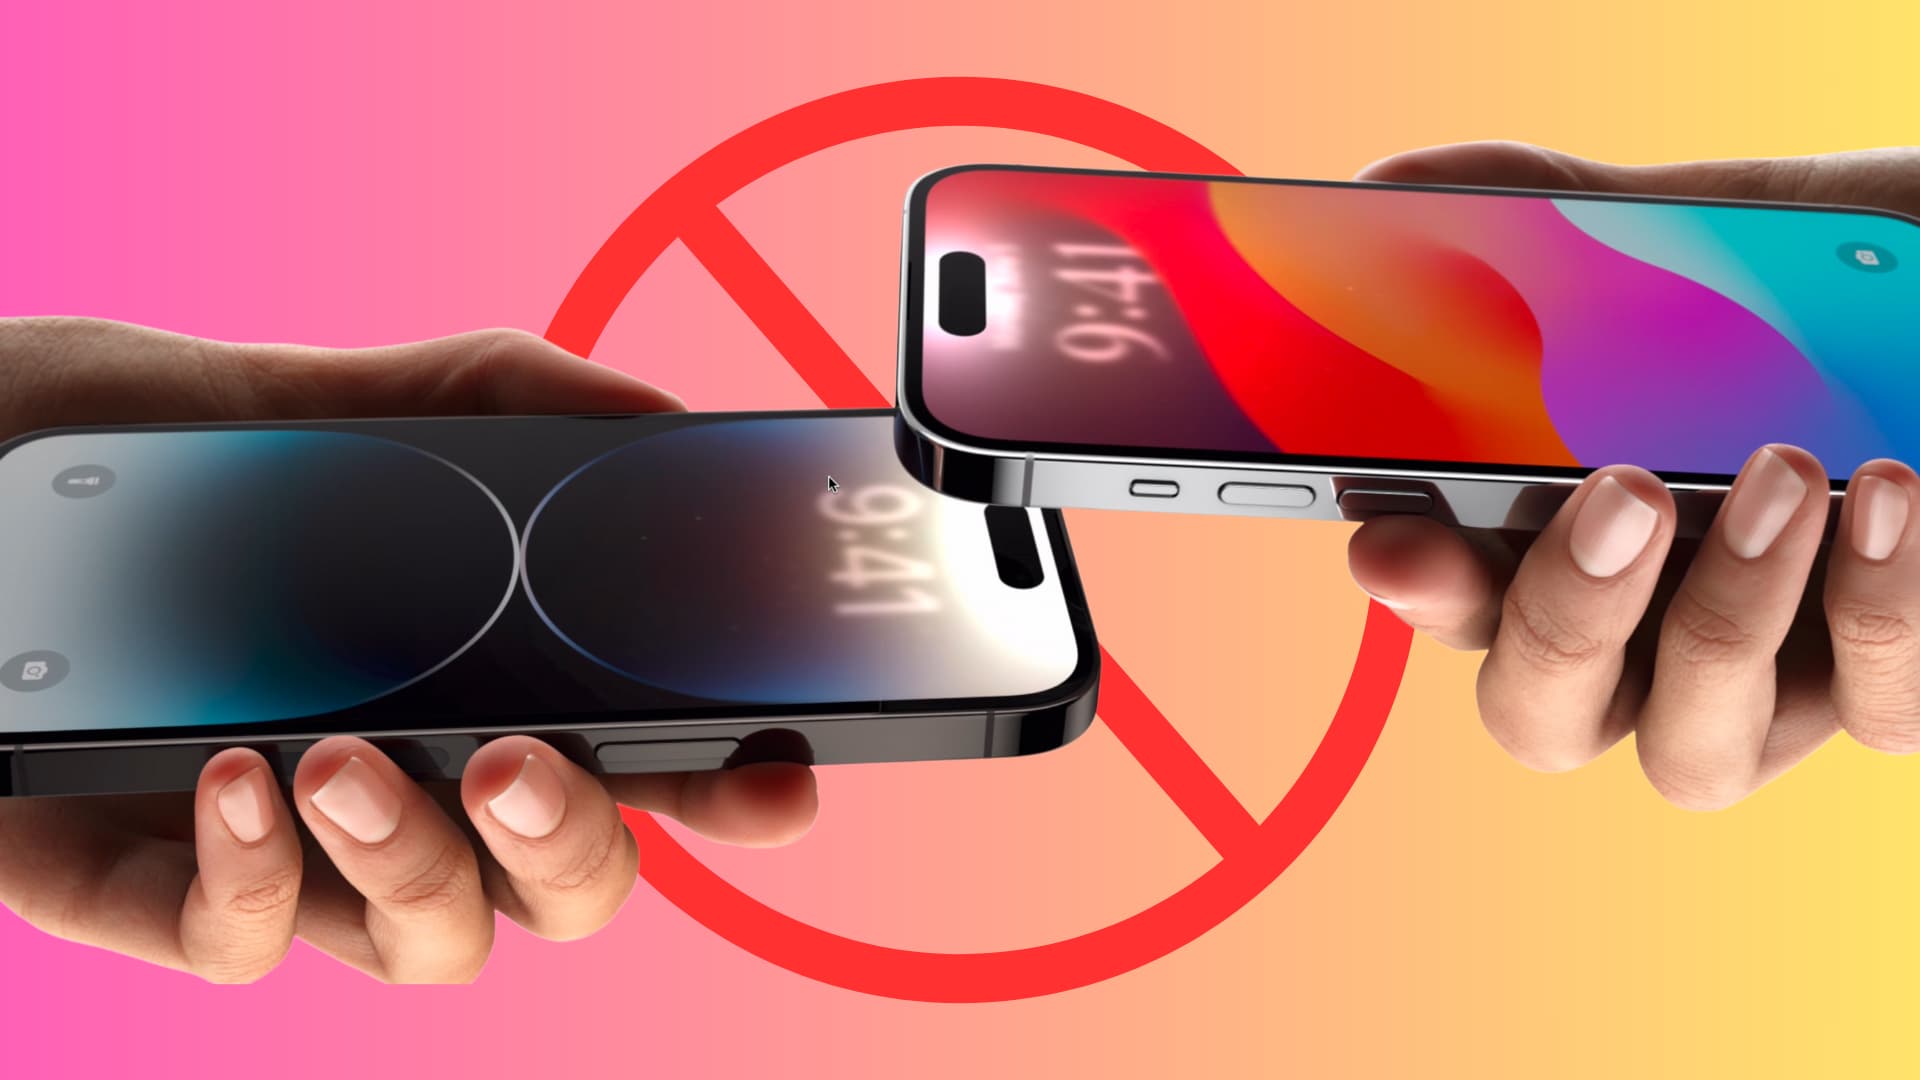 How To Turn Off NFC On IPhone